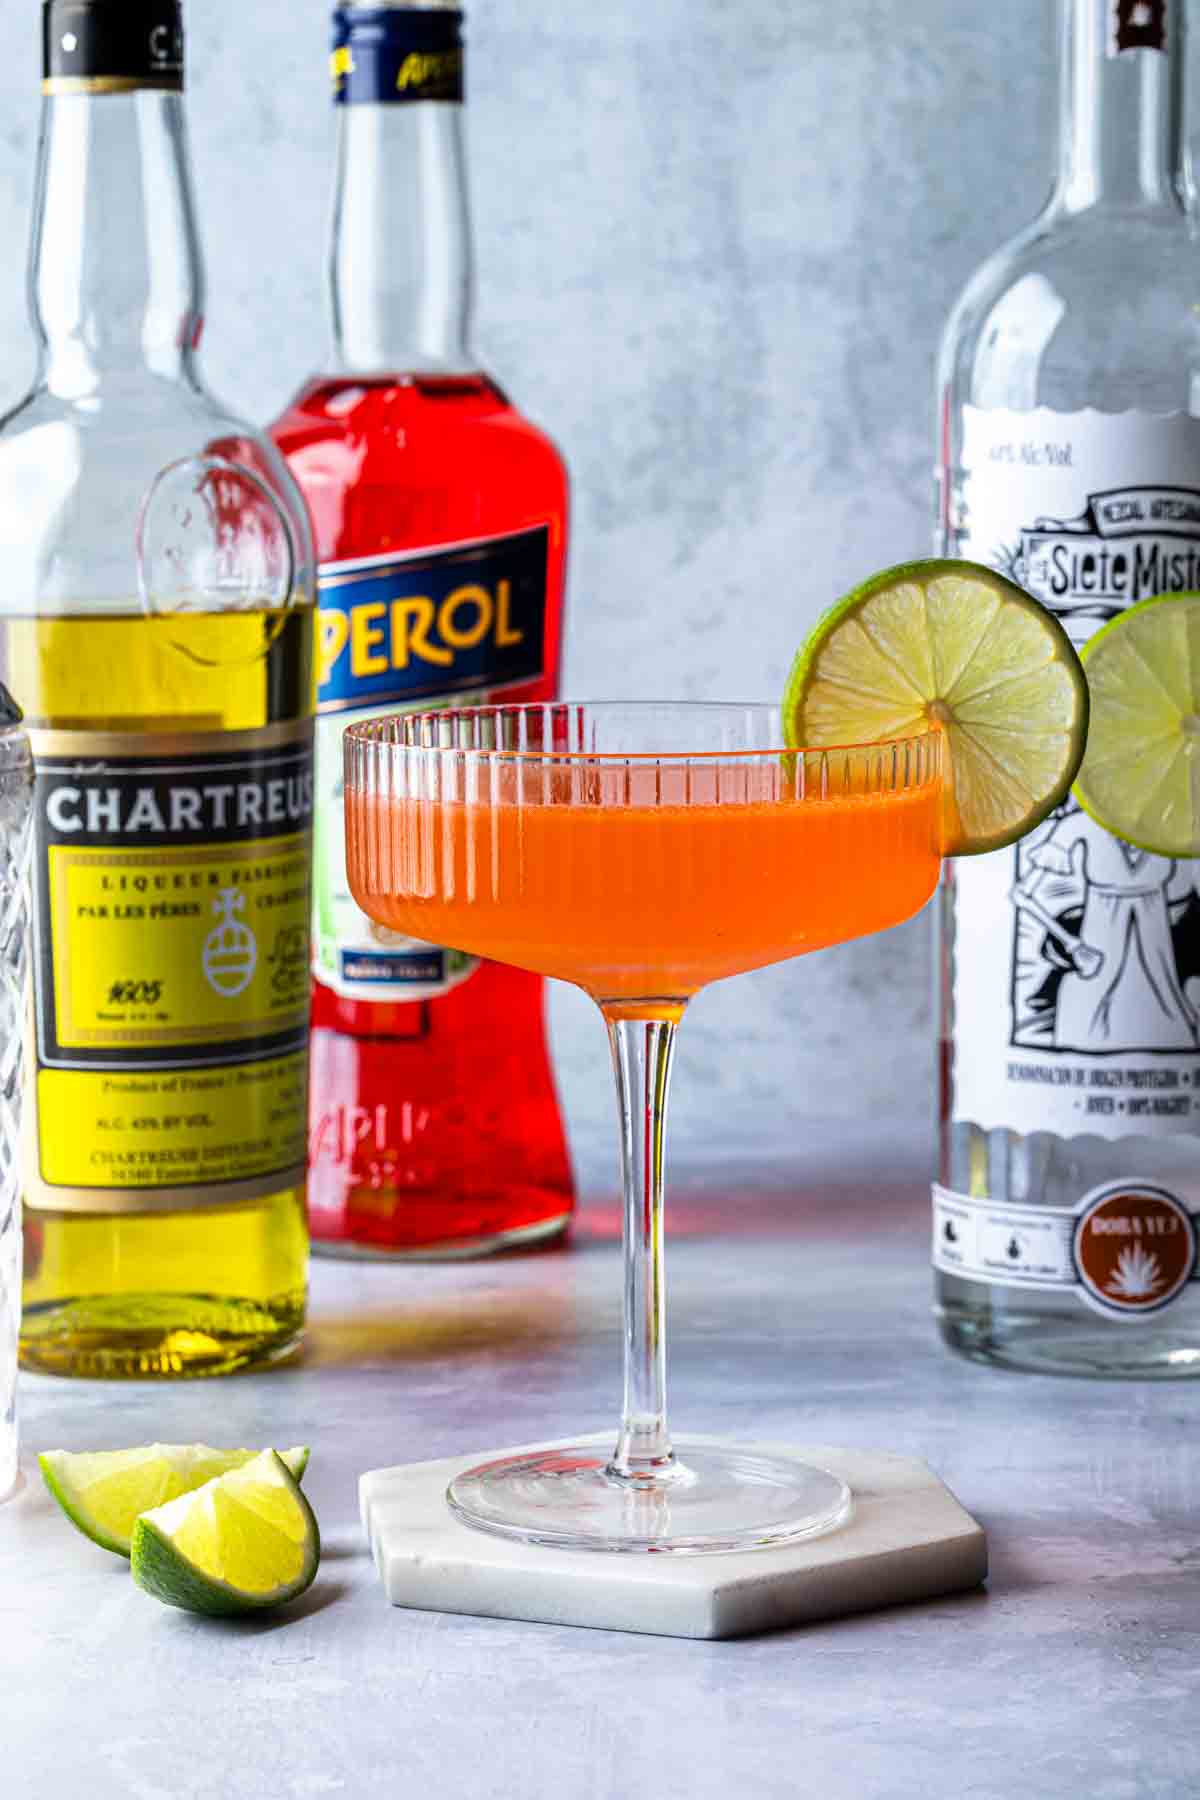 A cocktail in a coupe glass, garnished with a lime wheel. Bottles of yellow chartreuse aperol and mezcal behind the cocktail. 